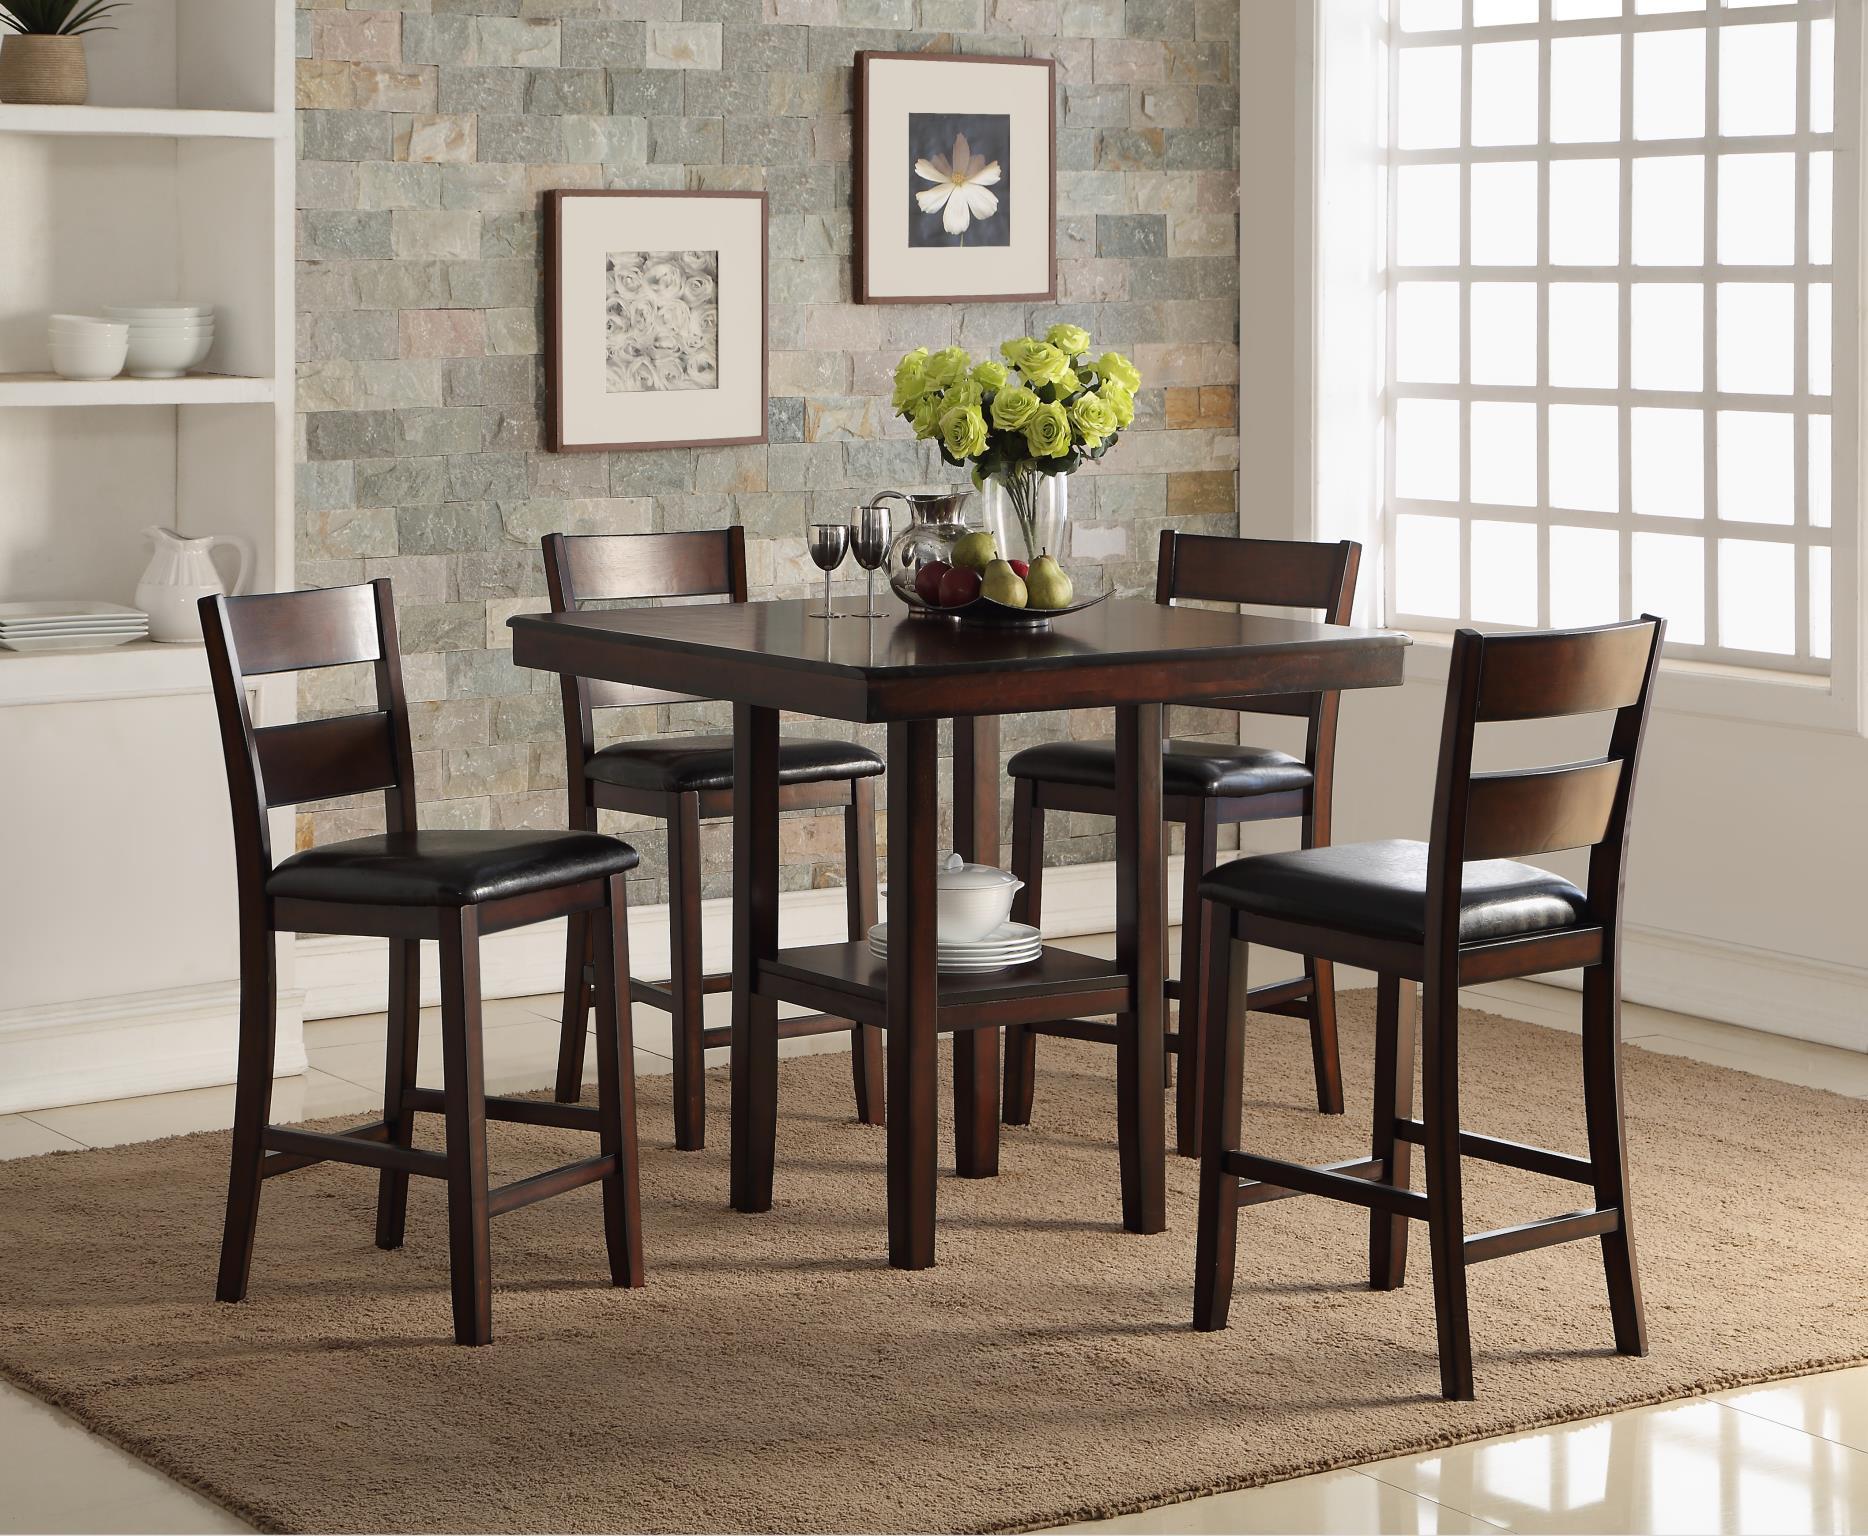 Contemporary, Transitional Counter Dining Set CROMWELL 5672-530 5672-530 in Brown PU